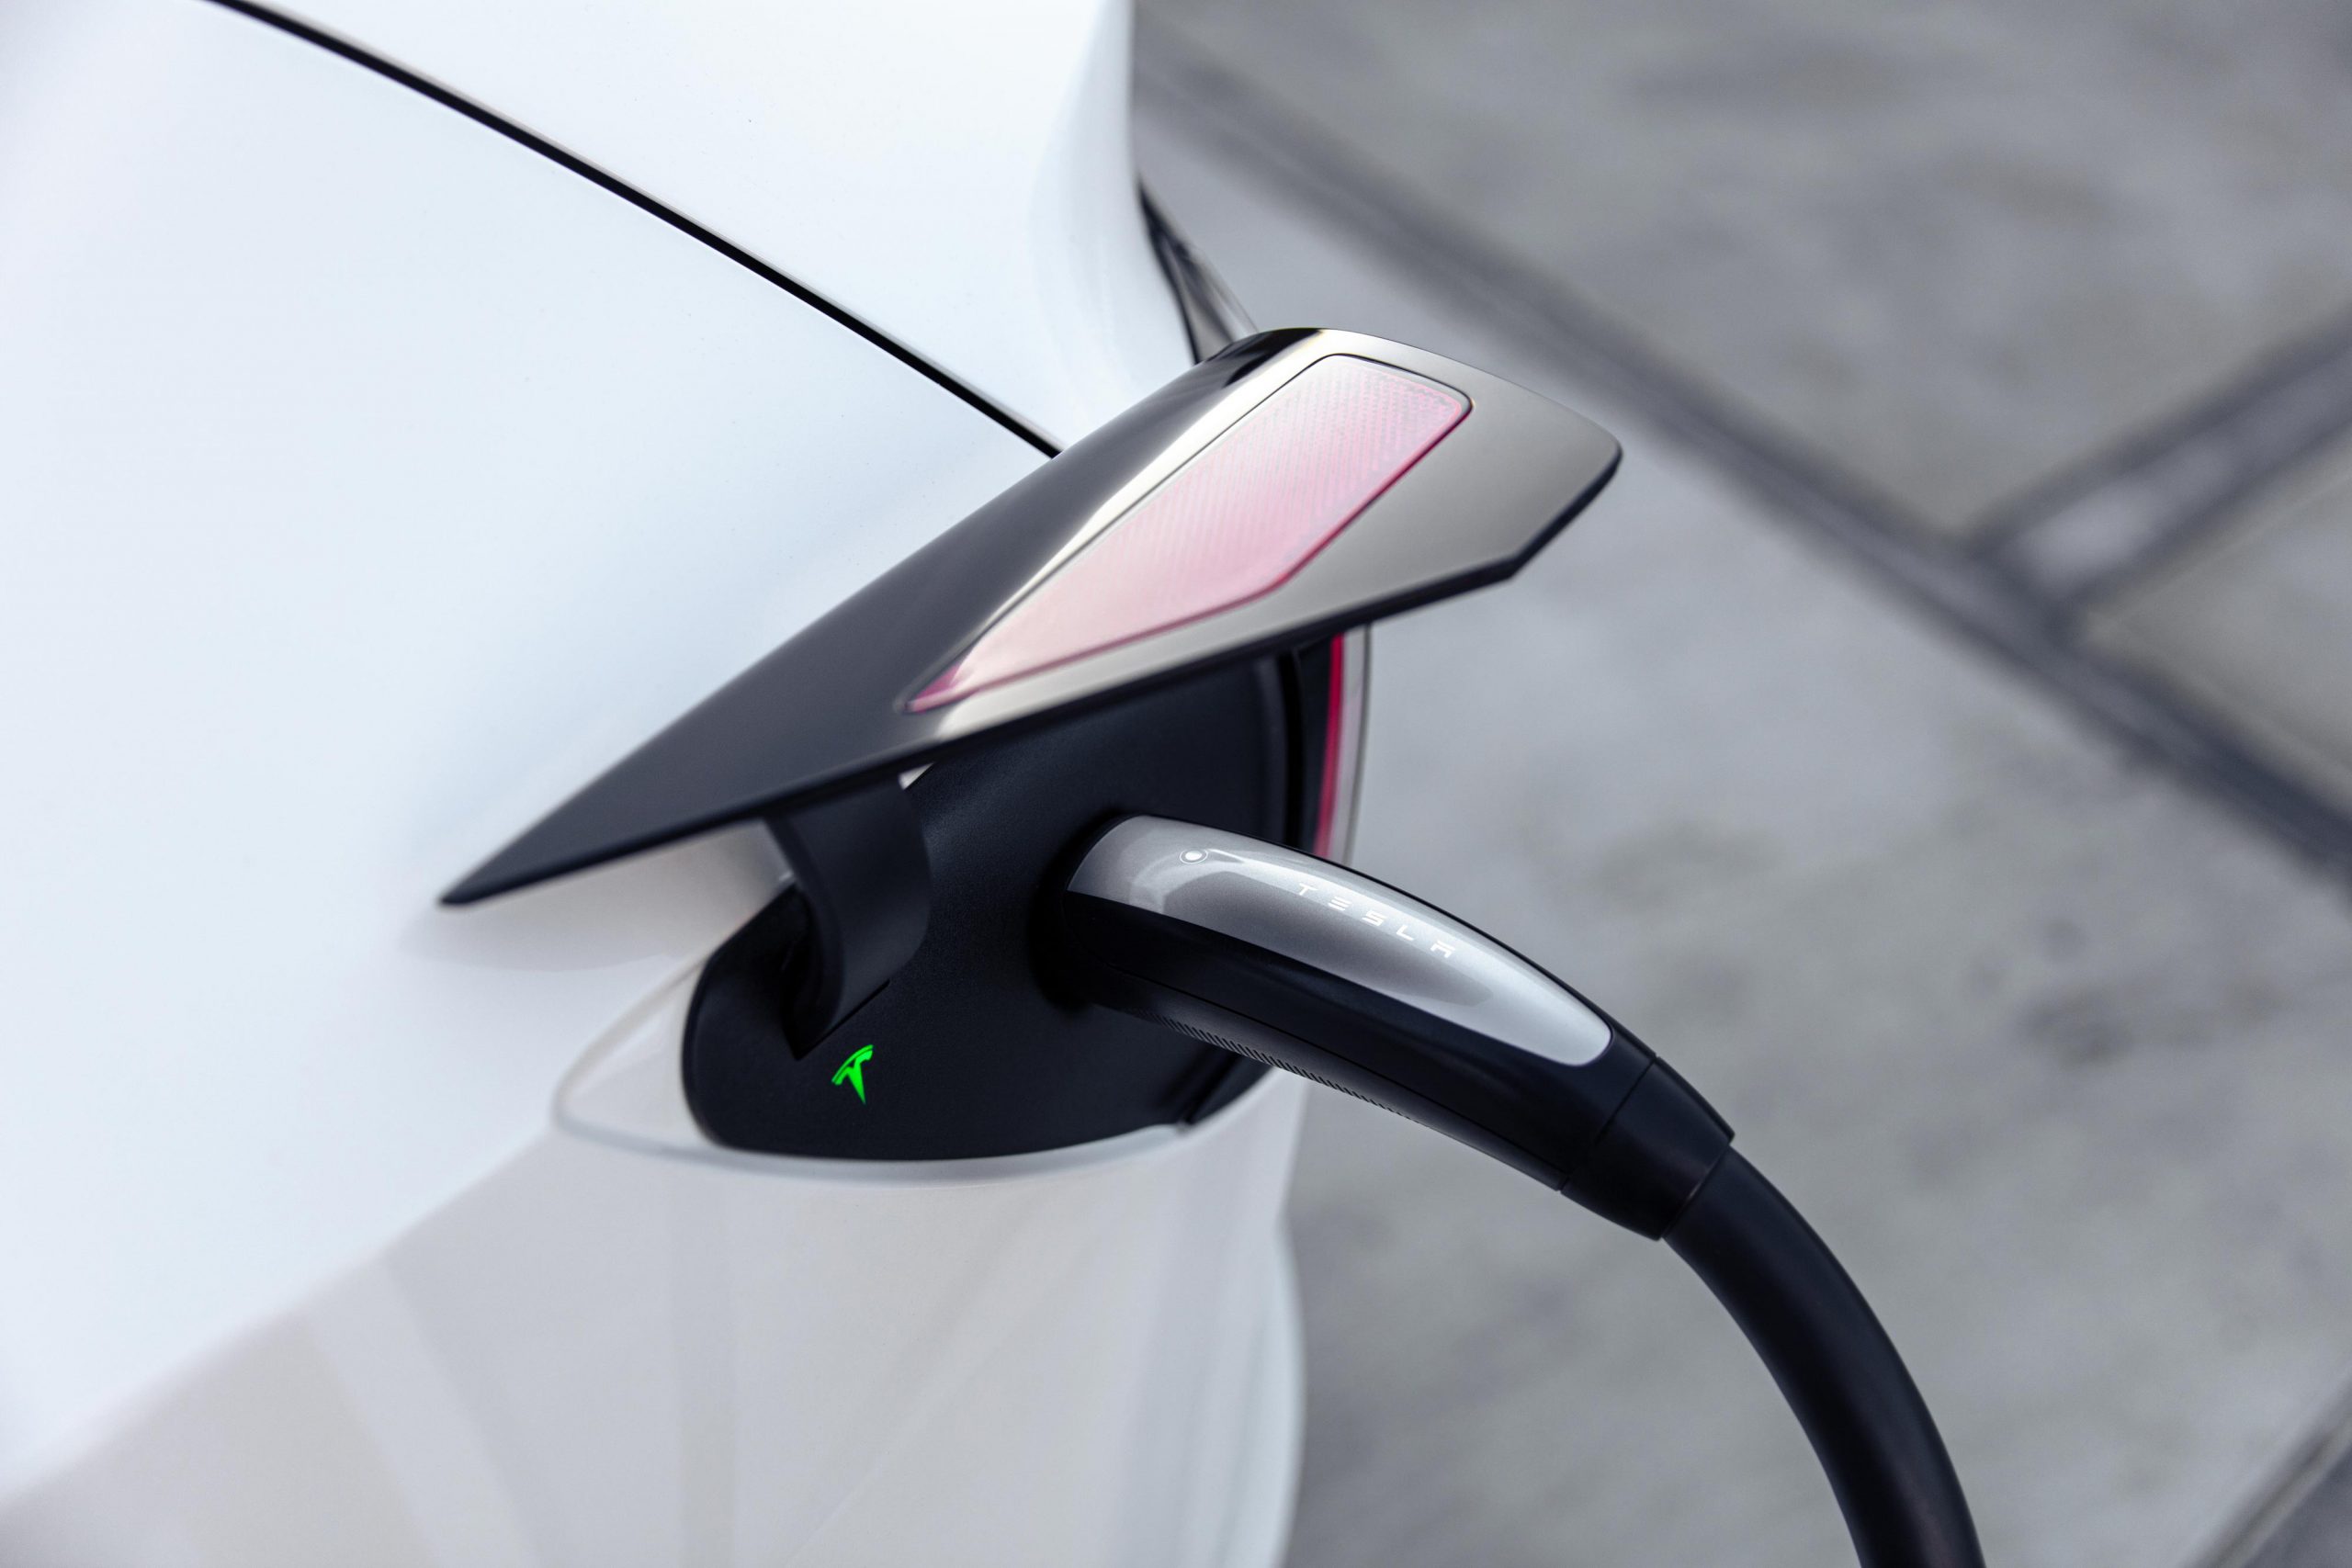 Tesla set to entry as much as $20B in revenues from Supercharger offers, Dan Ives says